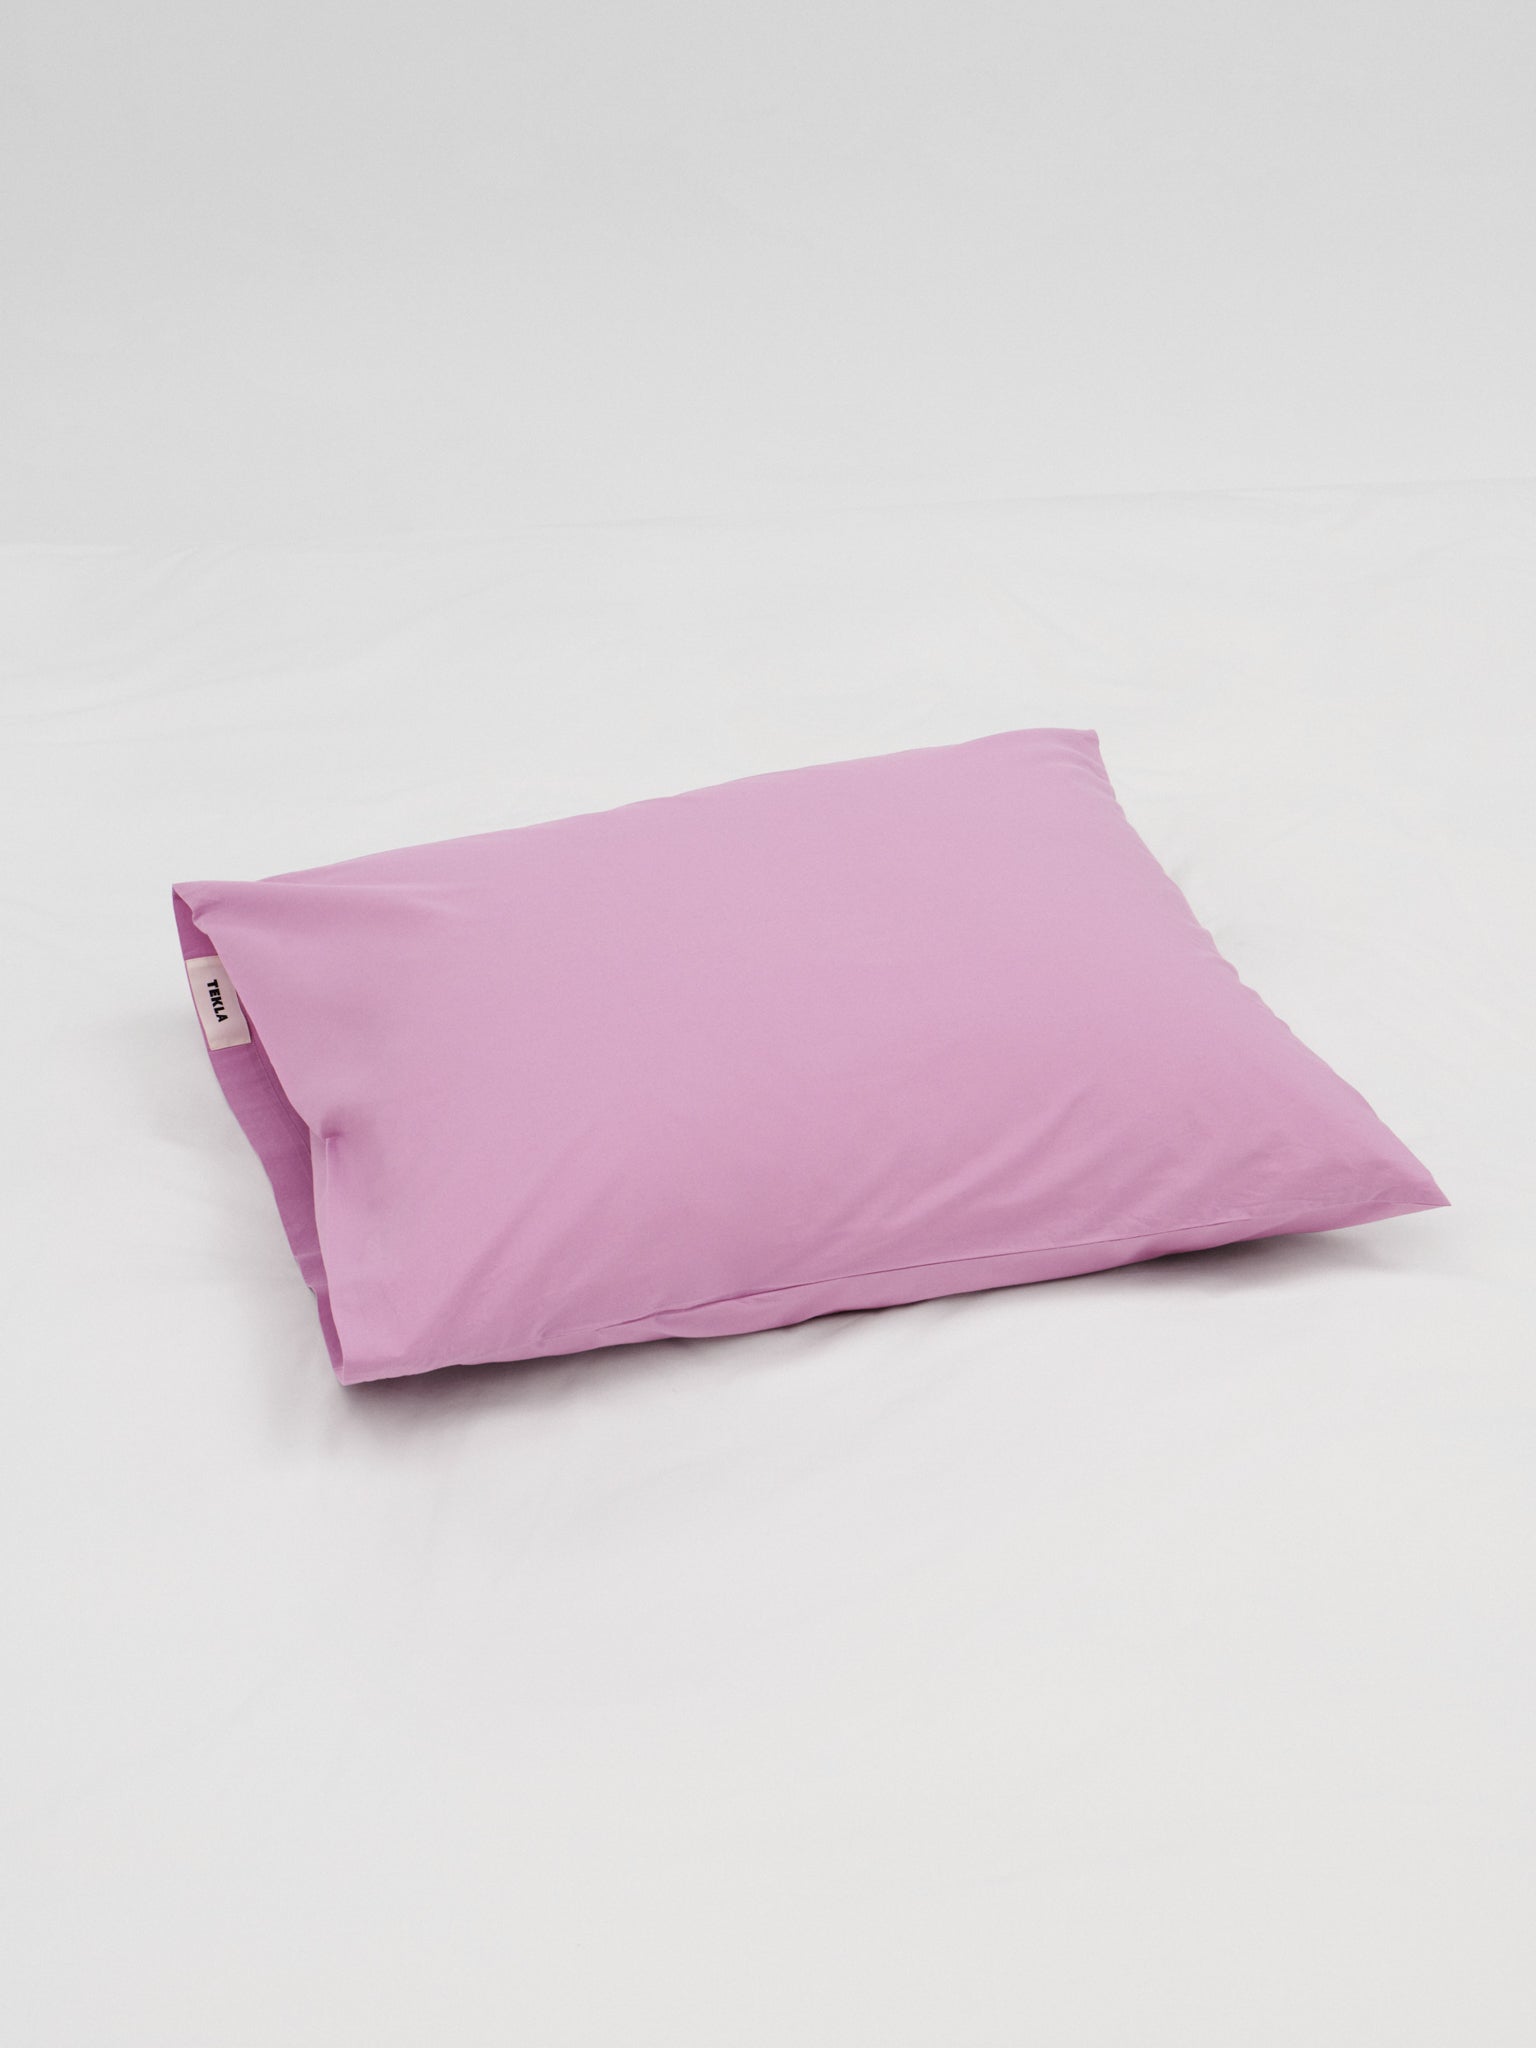 Tekla - Percale Pillow Sham in Mallow Pink